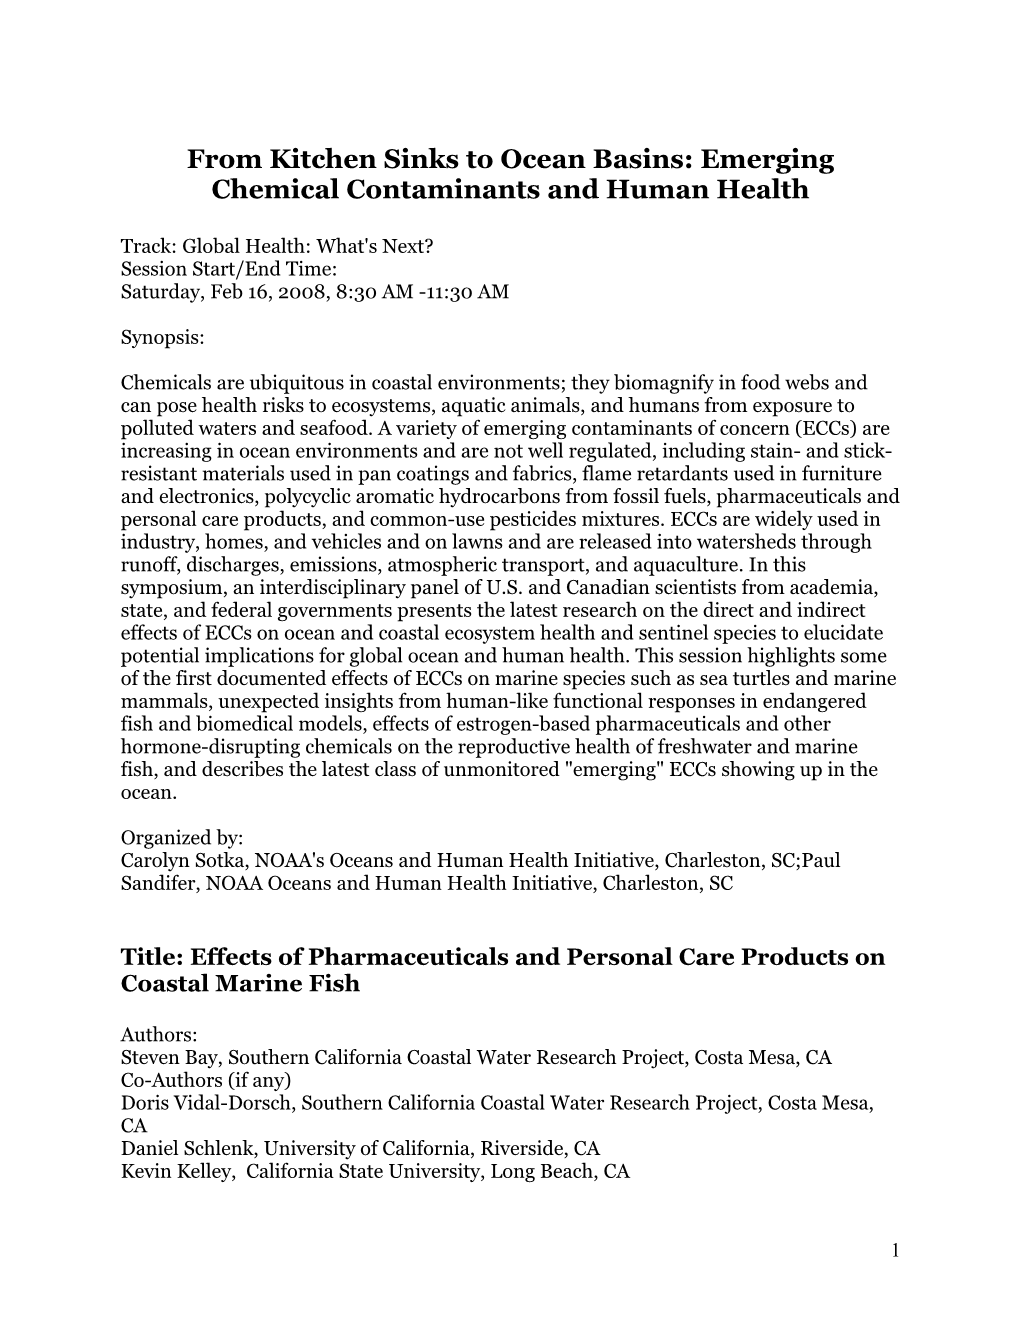 From Kitchen Sinks to Ocean Basins: Emerging Chemical Contaminants and Human Health